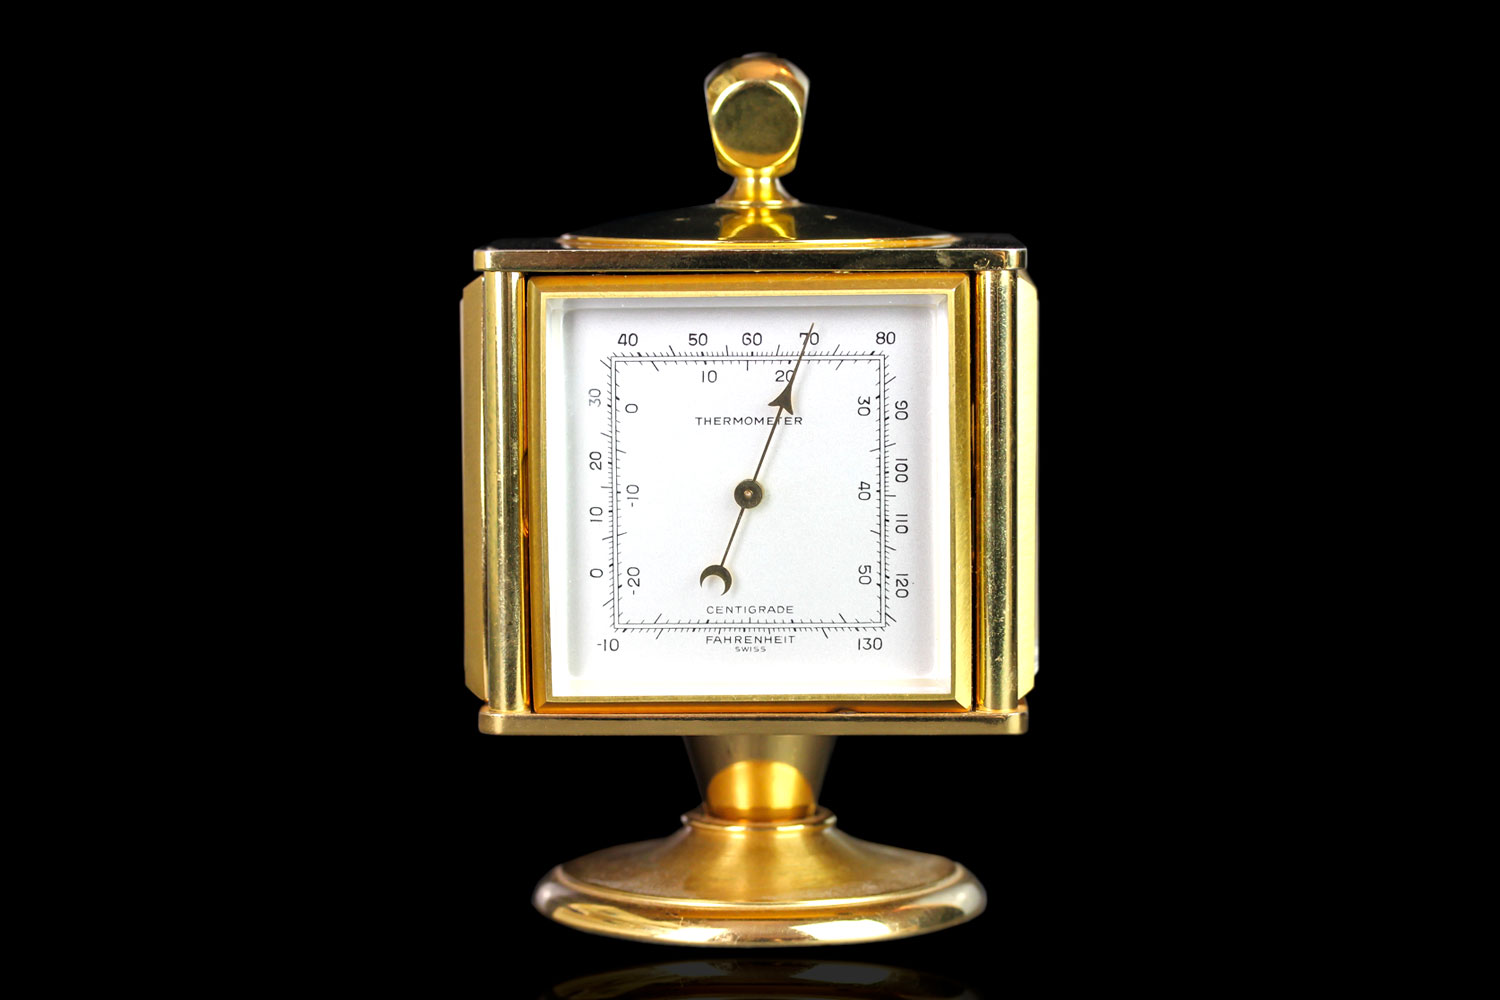 IMHOF Swiss desk clock, four sides with Time, Hygrometer, Barometer and Thermometer, gilt case - Image 4 of 7